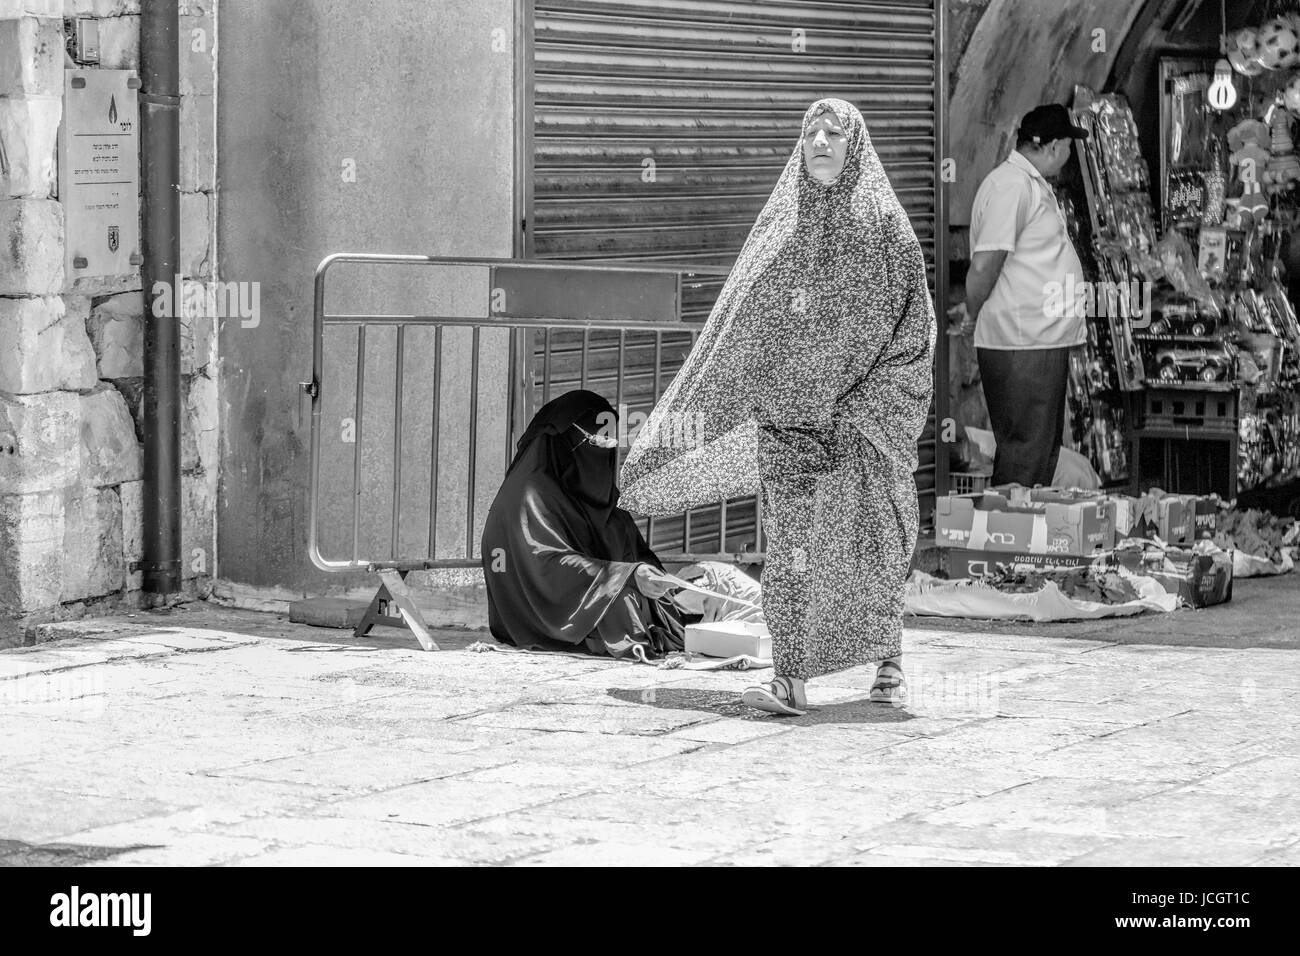 Seated woman with a NIQAB, a face veil and a walking woman in a CHADOR, a traditional Muslem dress in the Arab Quarter,Old City of Jerusalem, Israel. Stock Photo